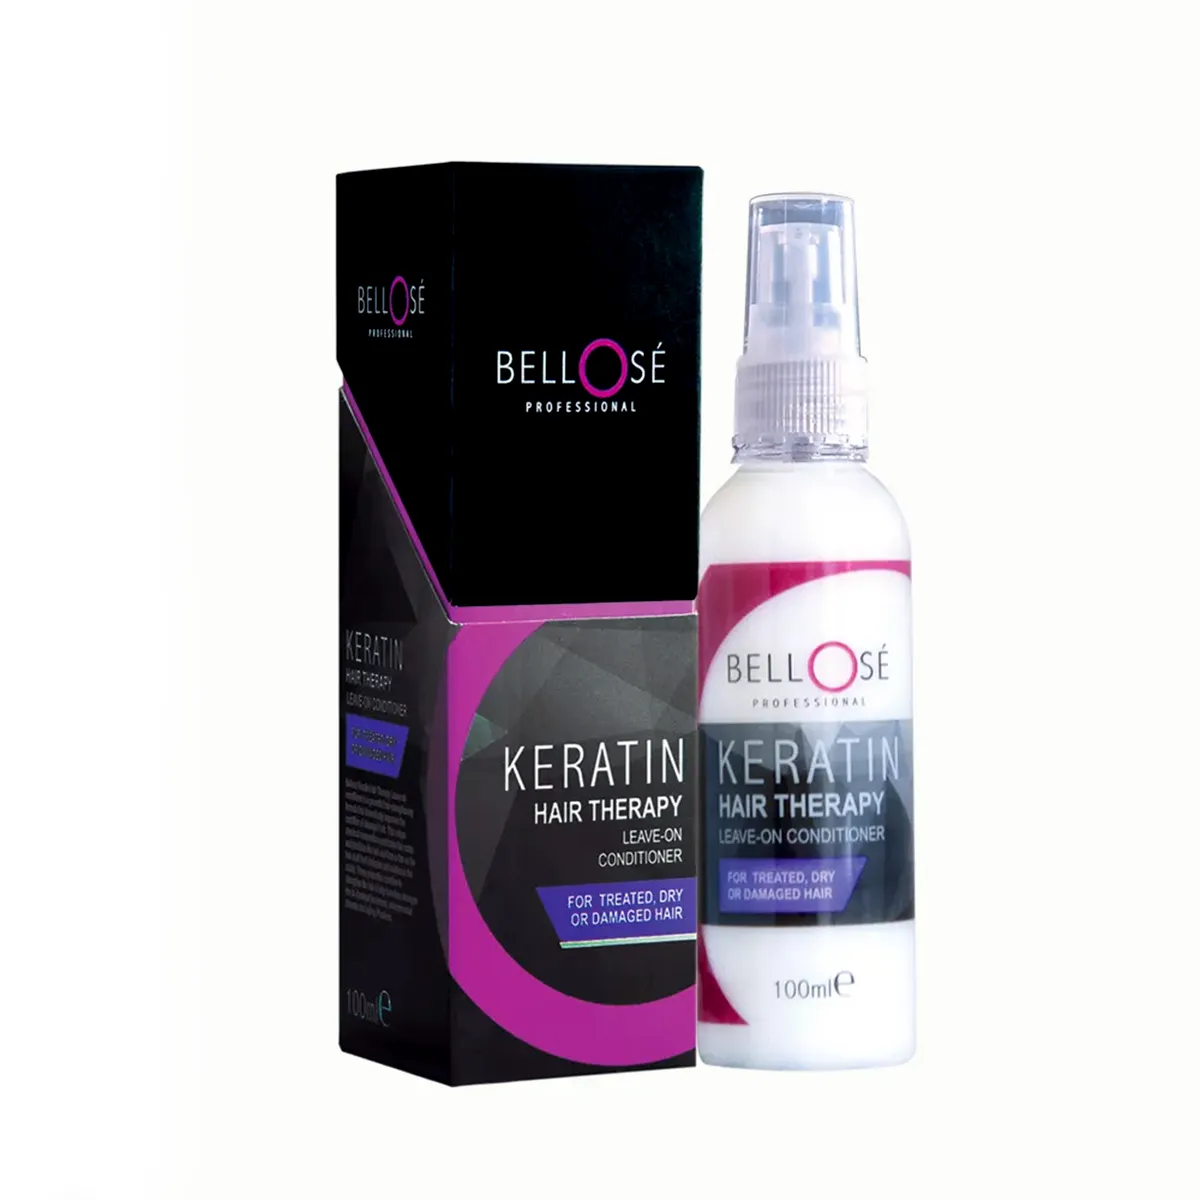 First product image of Bellose Keratin Hair Therapy 100ml